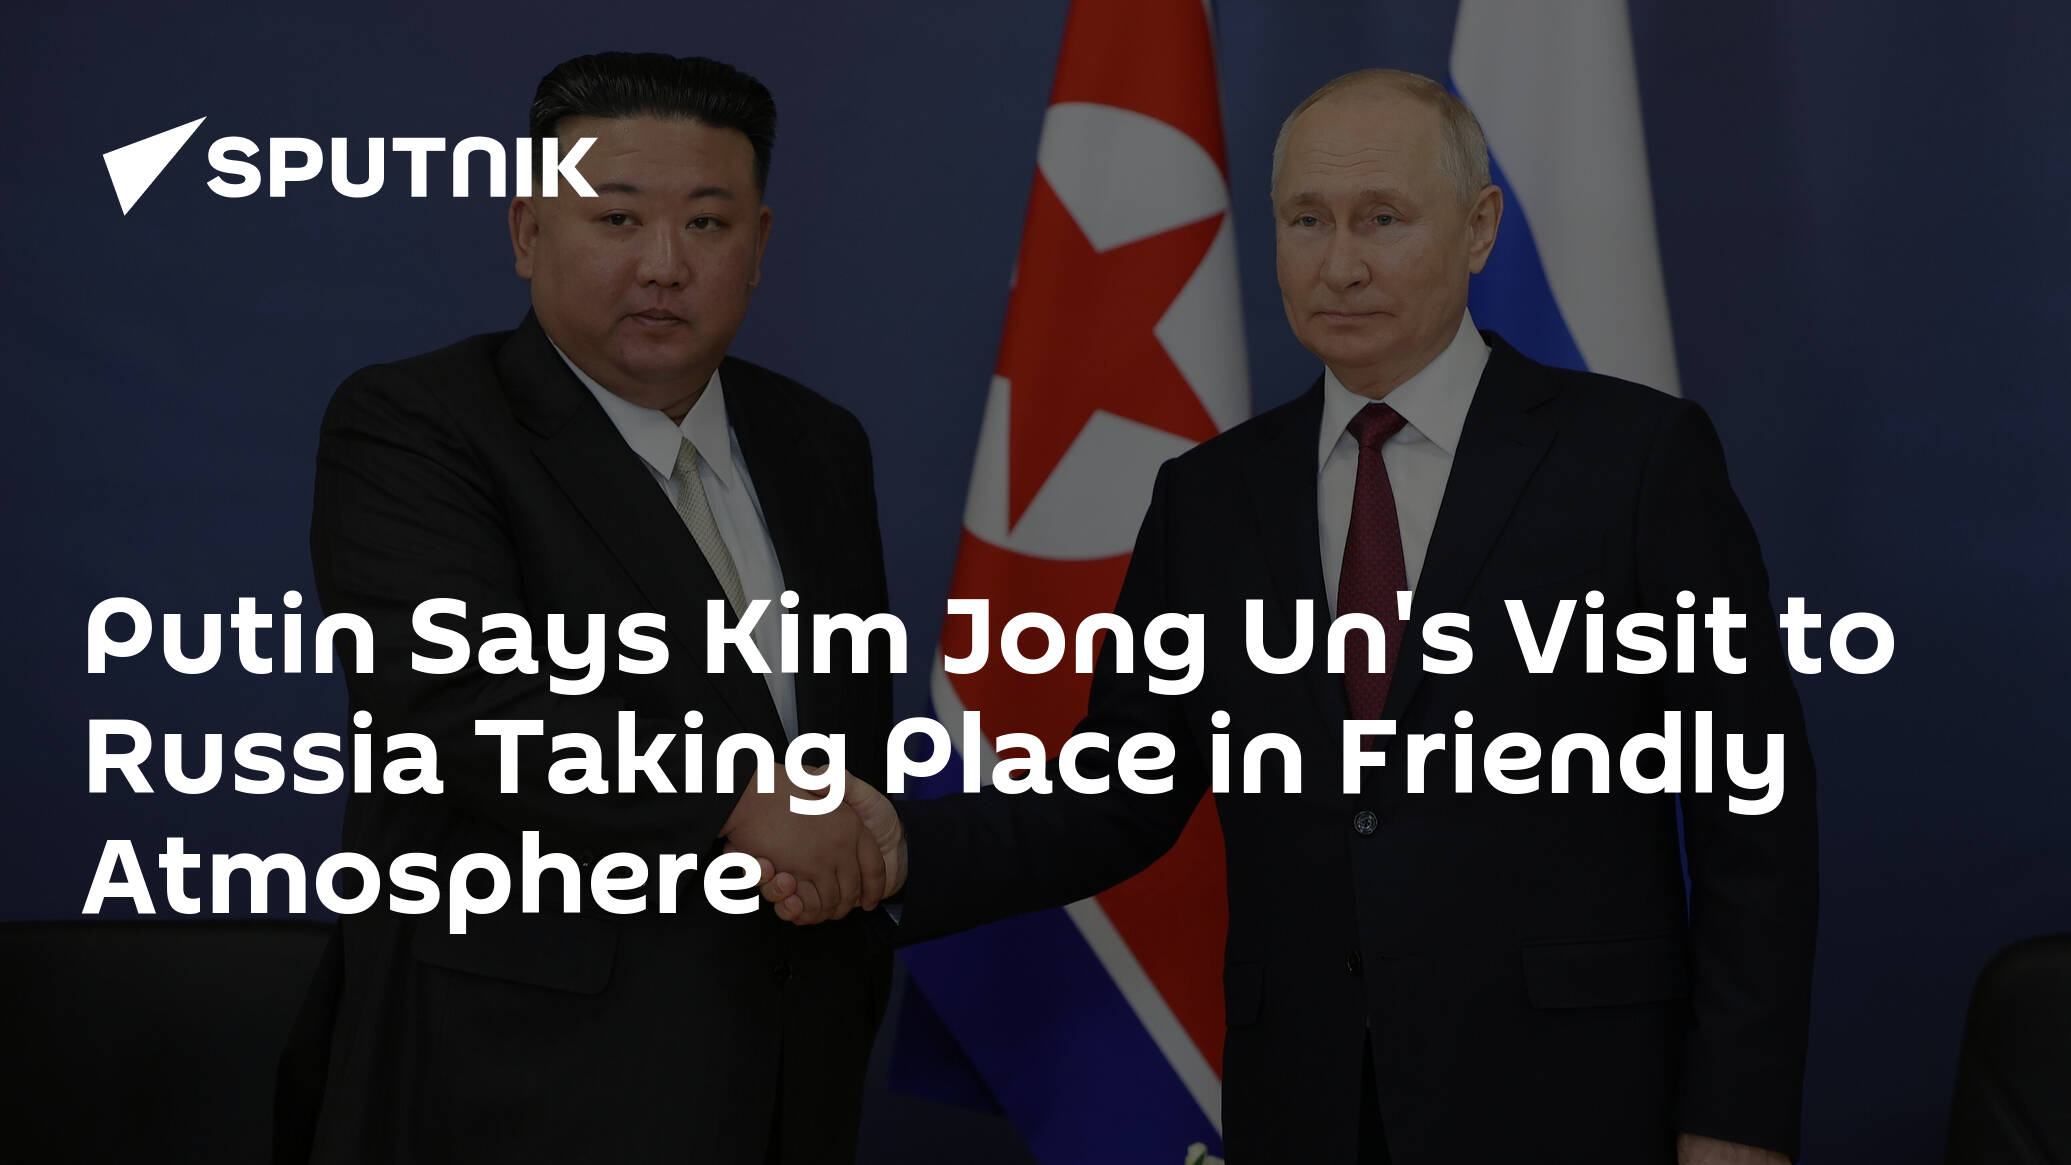 Putin Says Kim Jong Un's Visit to Russia Taking Place in Friendly Atmosphere